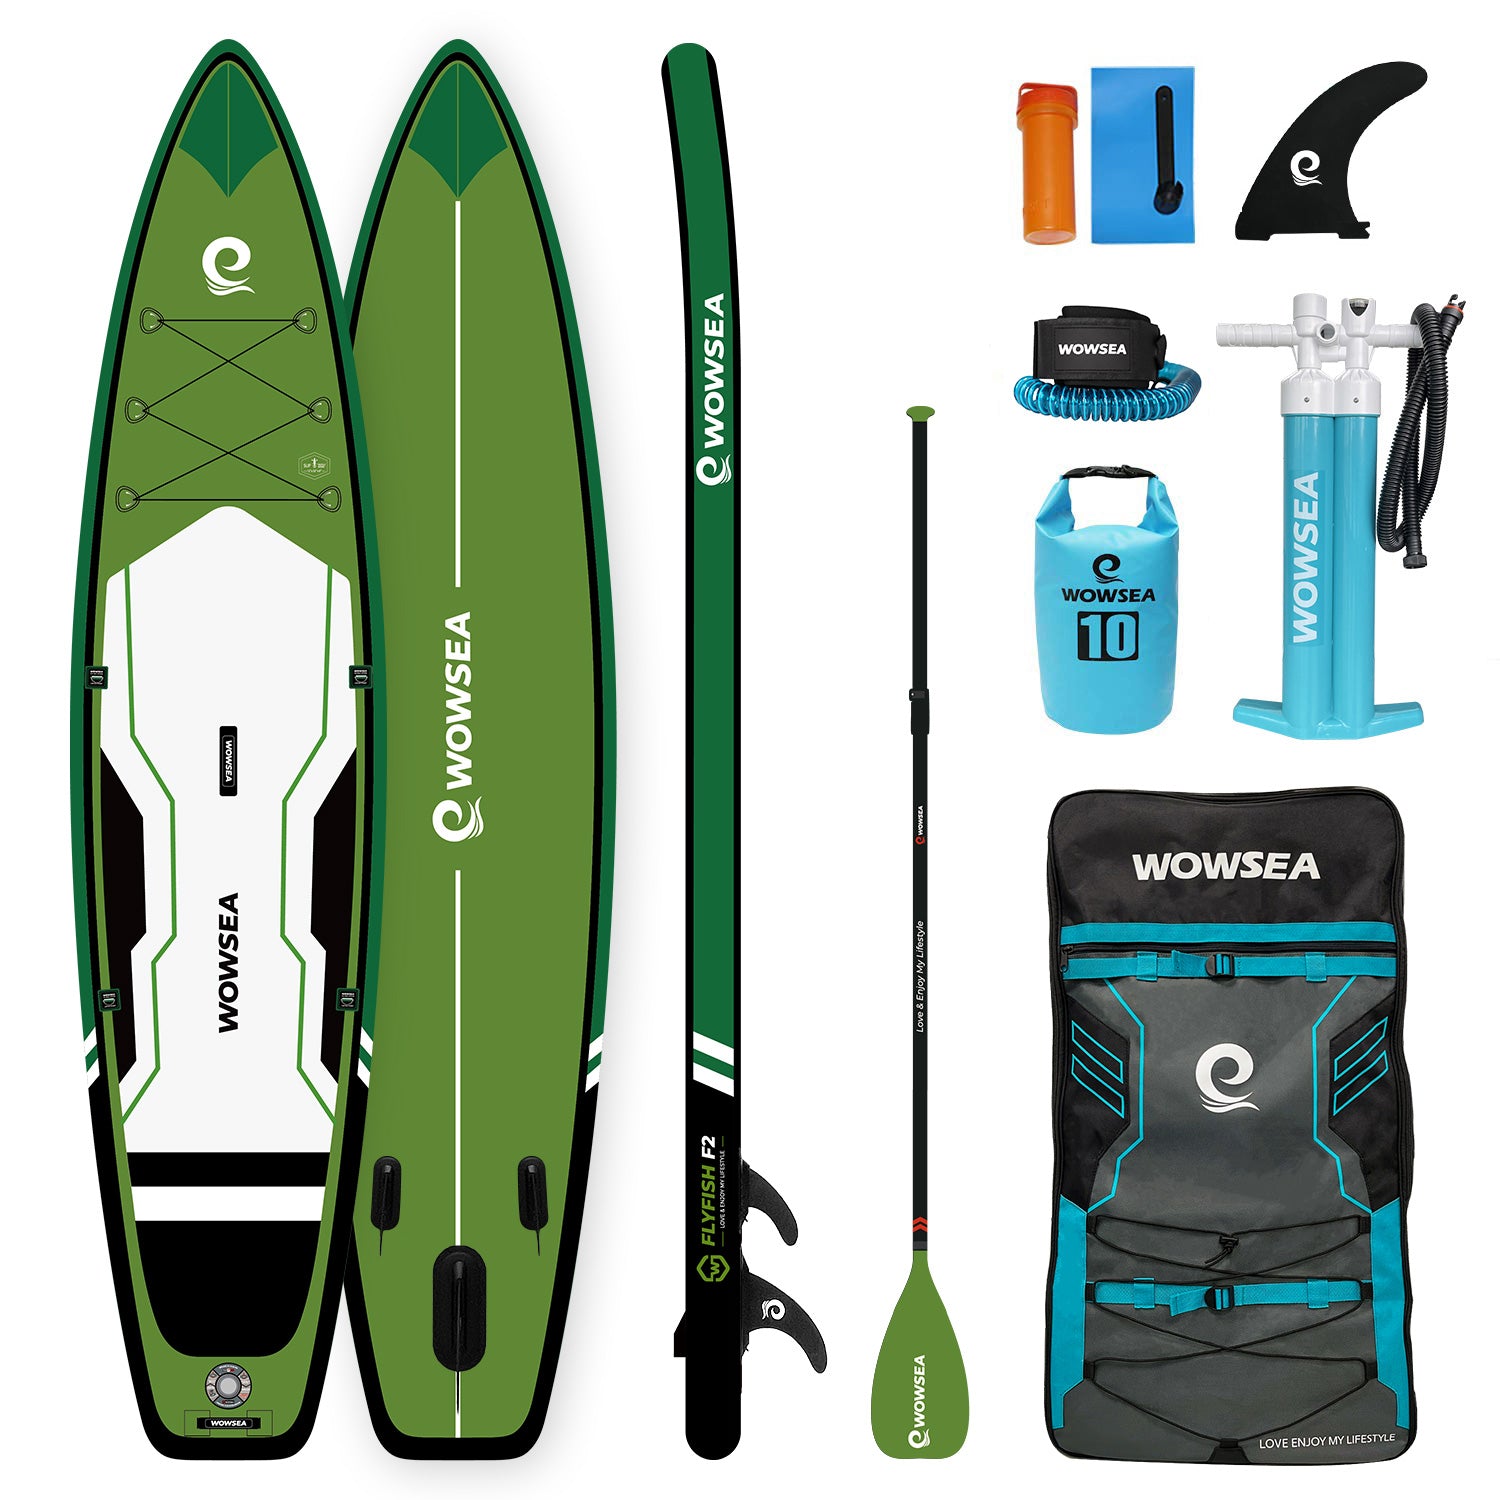 WOWSEASUP 12\'/366cm Flyfish Package Paddle - SUP F2 Board